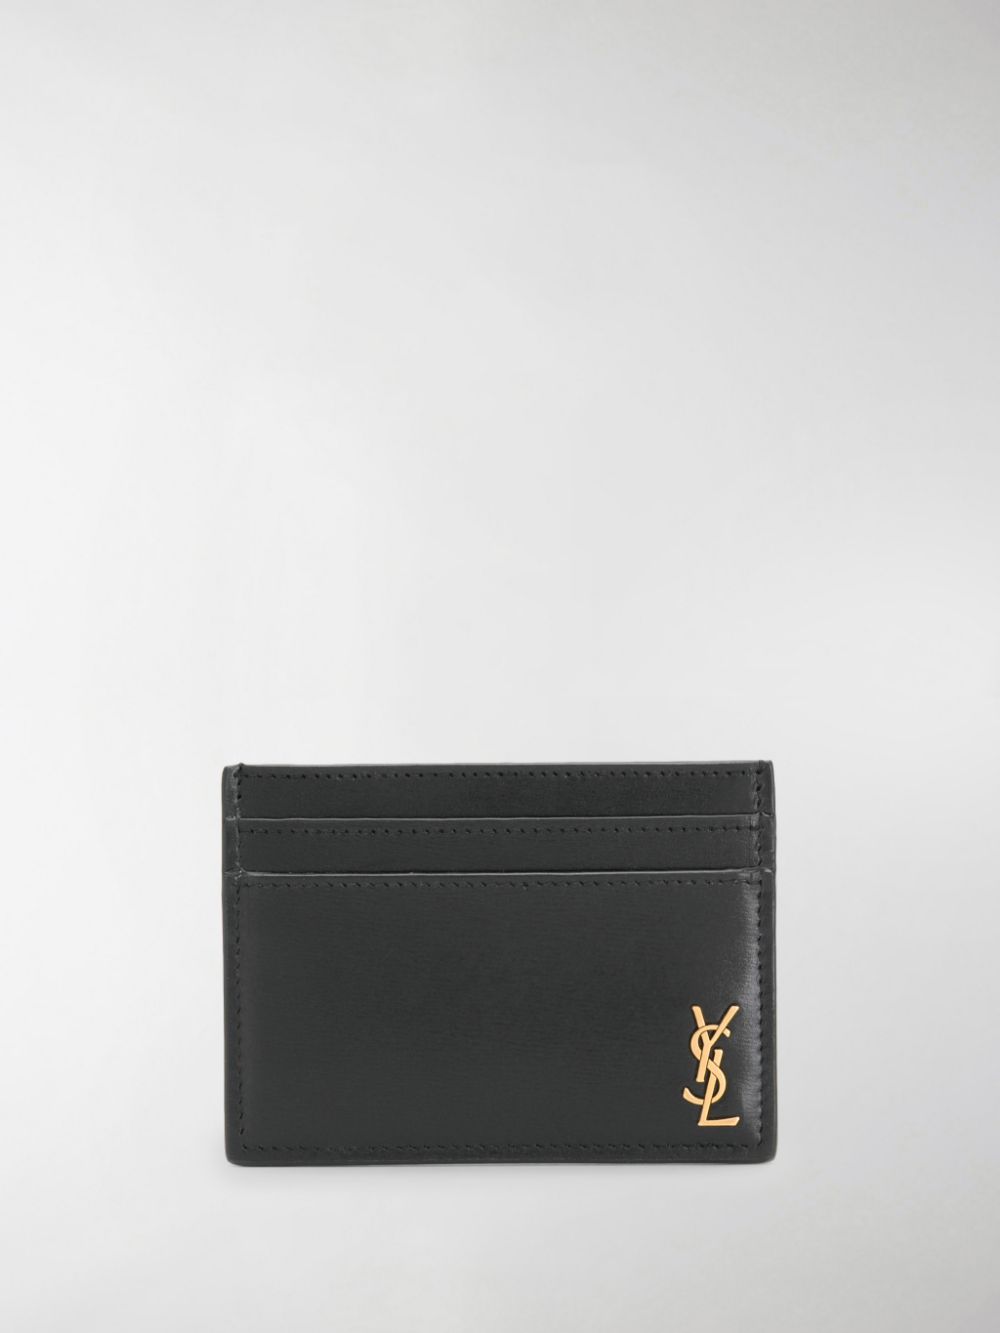 Crafted from smooth black leather